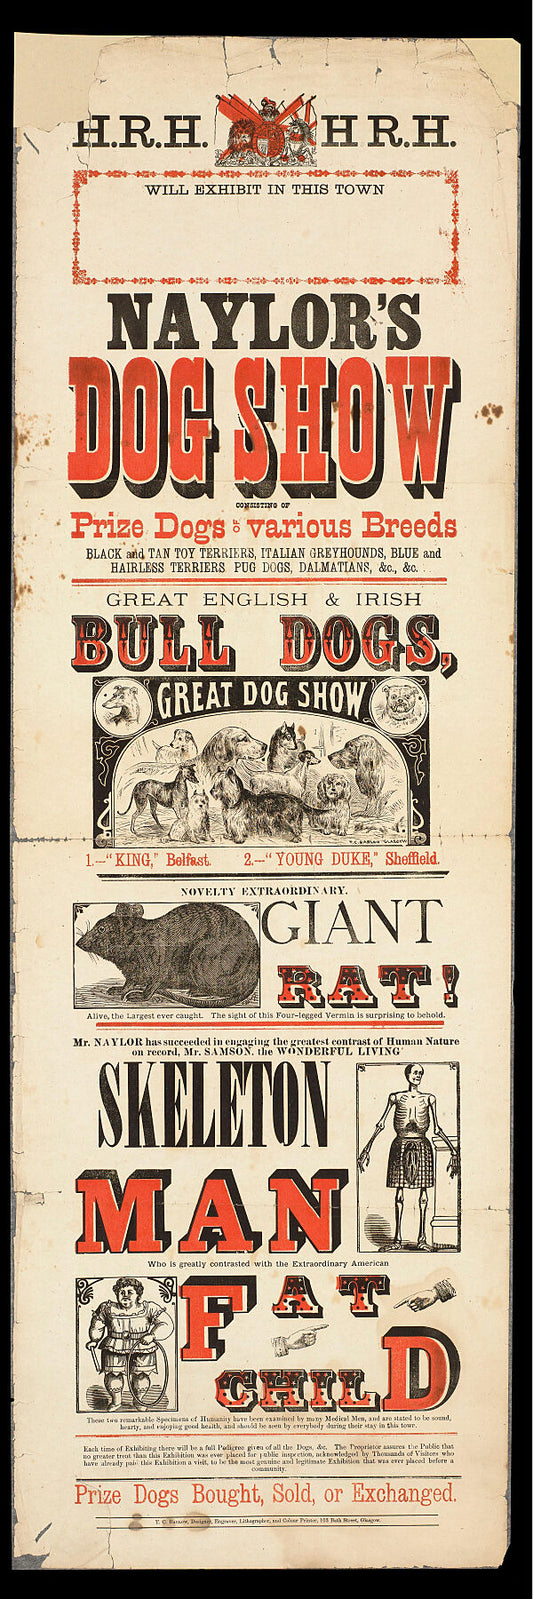 Naylor's Dog Show consisting of prize dogs of various breeds... - novelty extraordinary giant rat... - Mr. Samson, the wonderful Living Skeleton Man who is greatly contrasted with the extraordinary American Fat Child.  Date [c.1879]